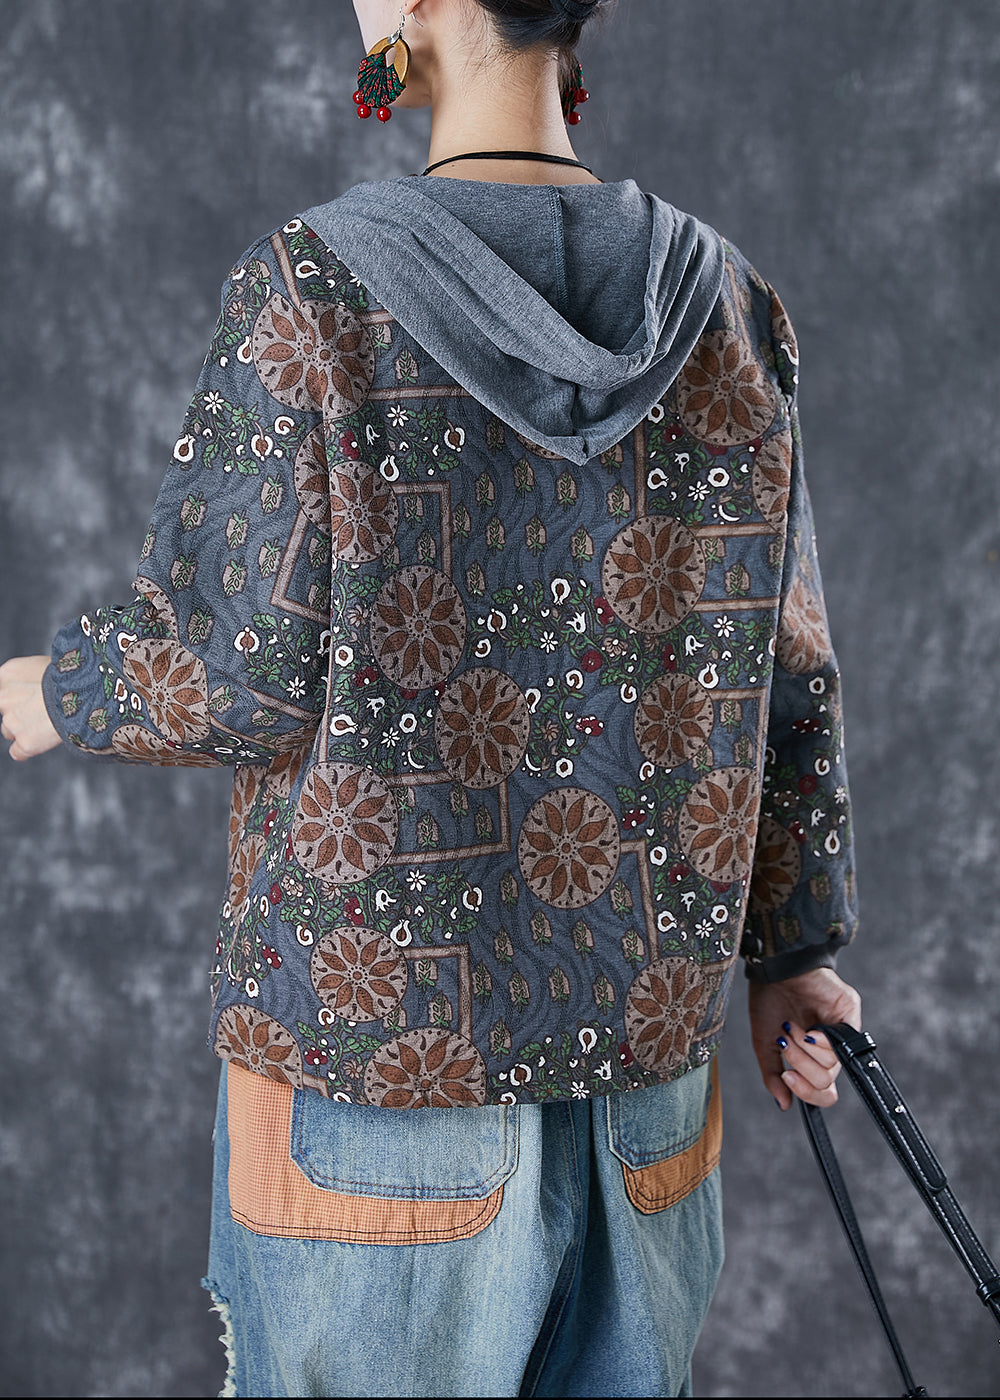 Blue Grey Patchwork Cotton Jackets Hooded Print Fall